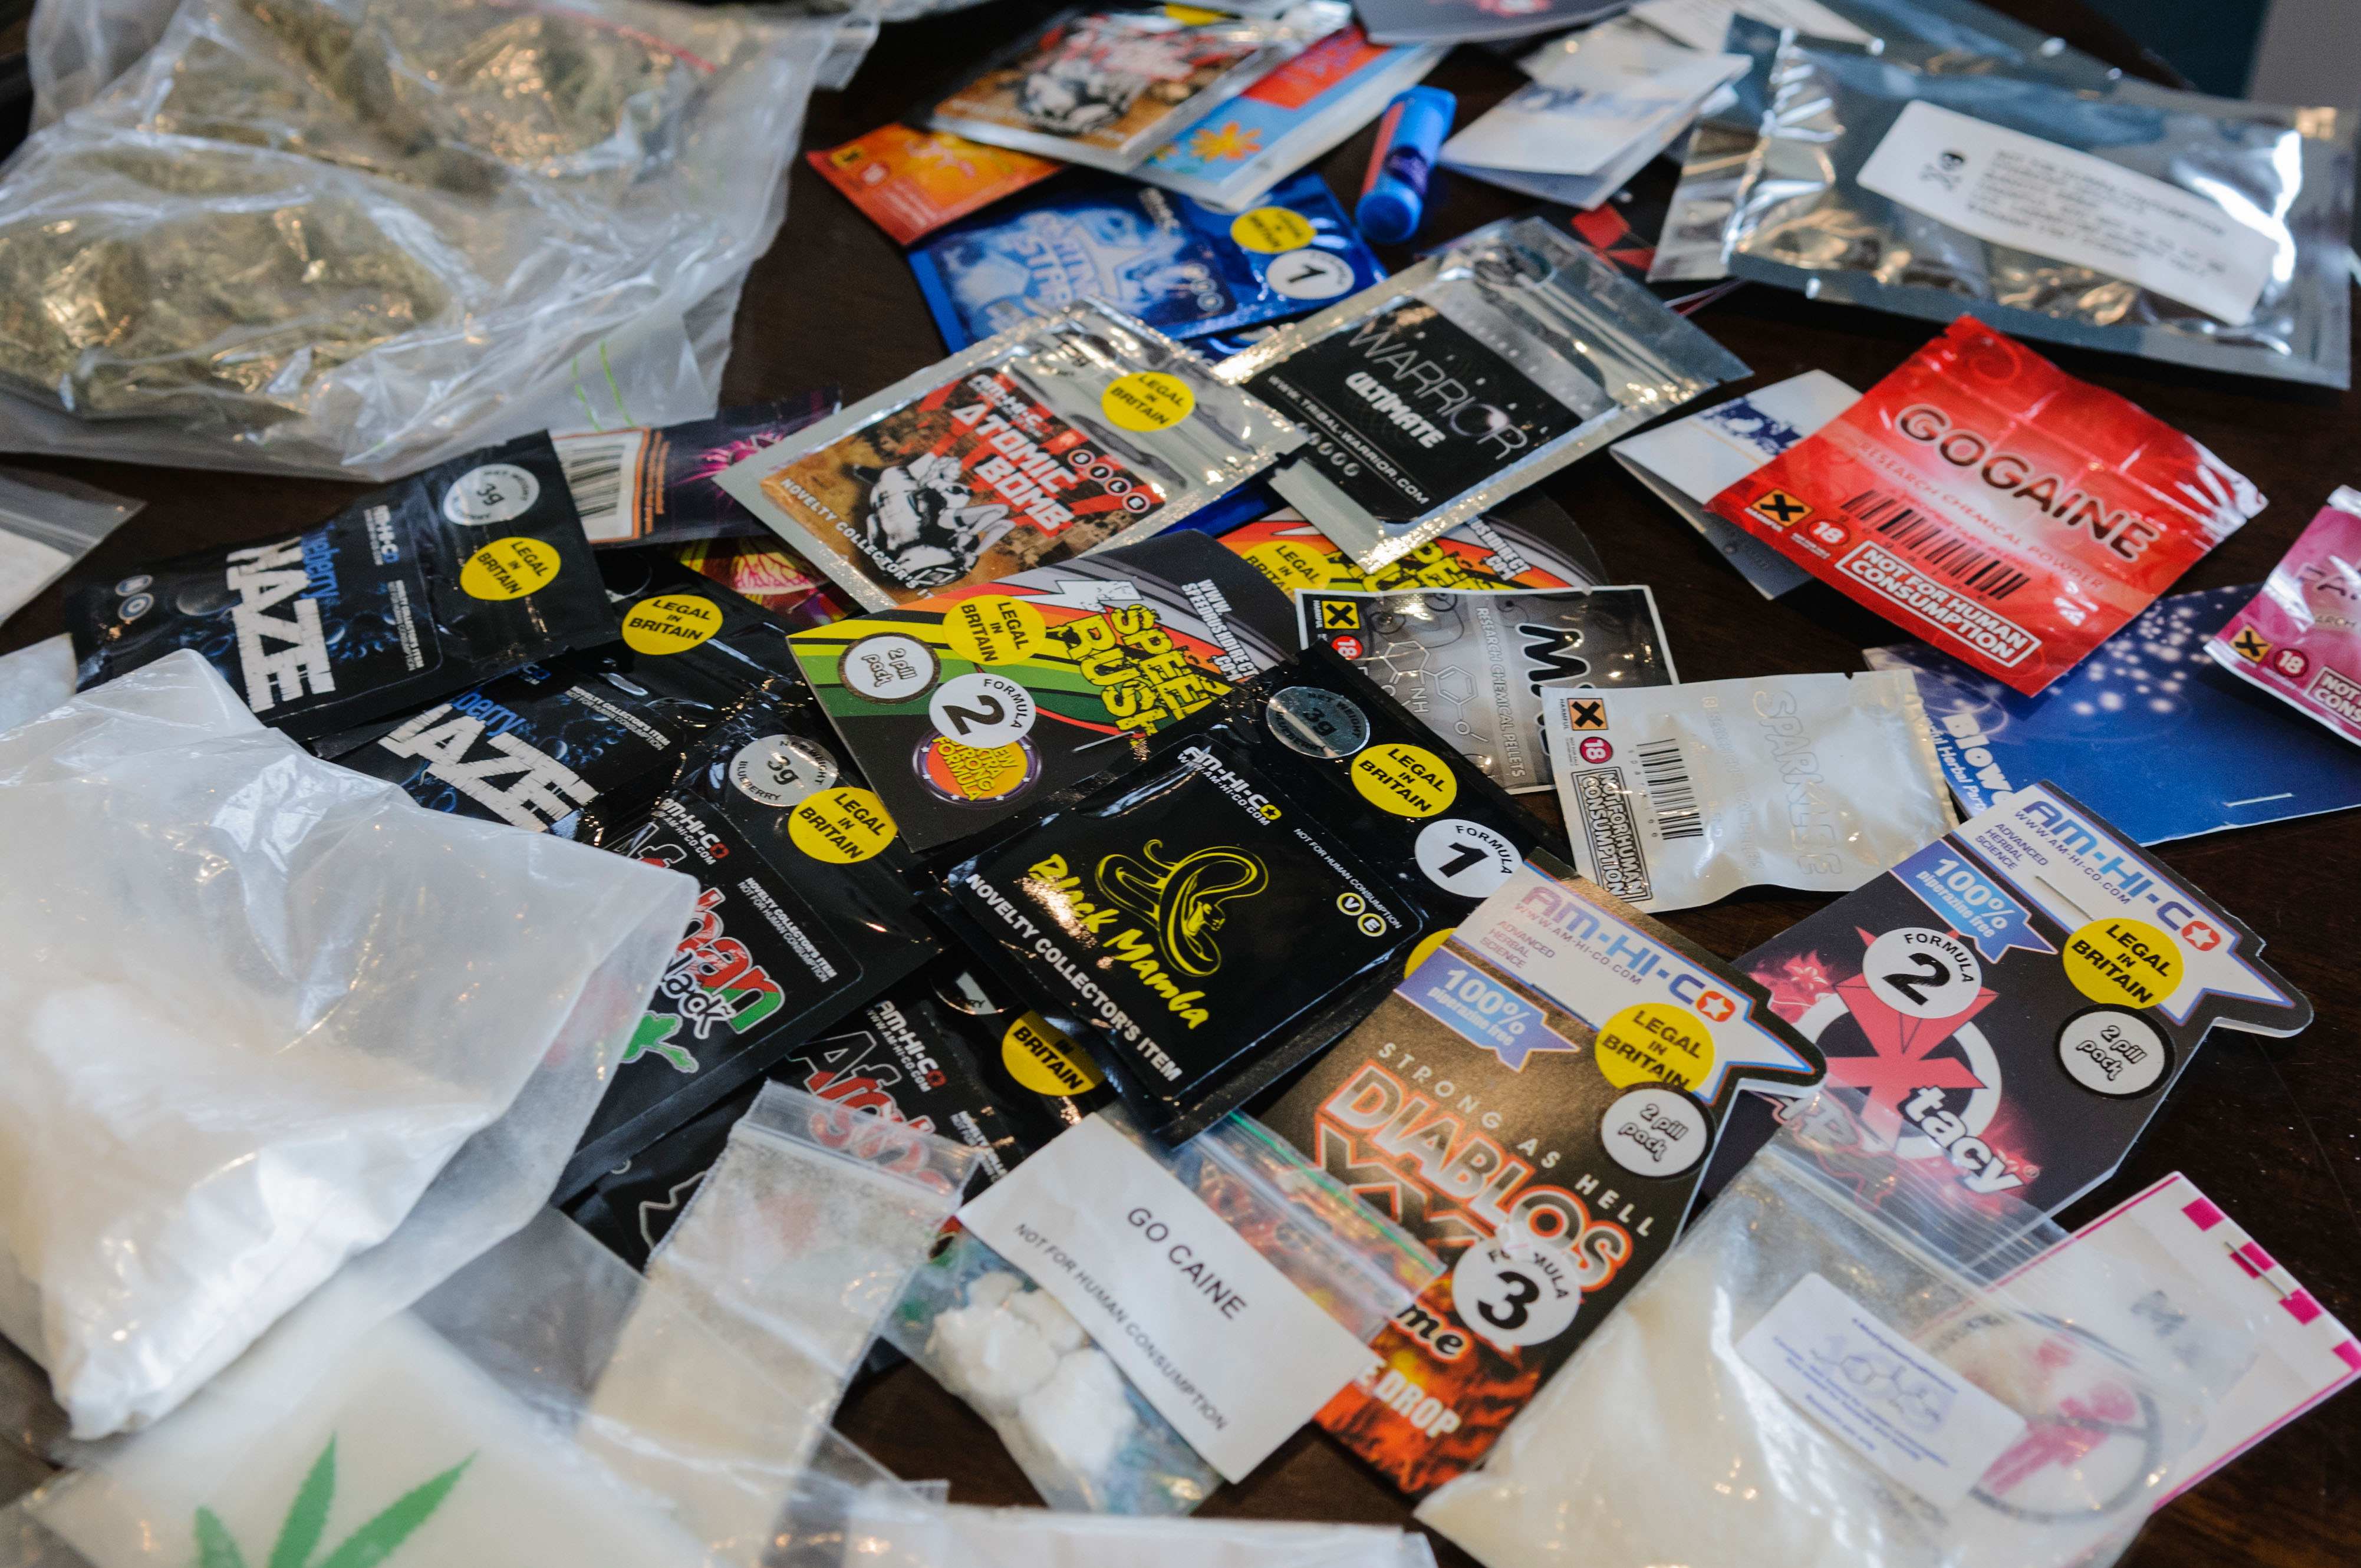 Legal Highs and Research Chemicals